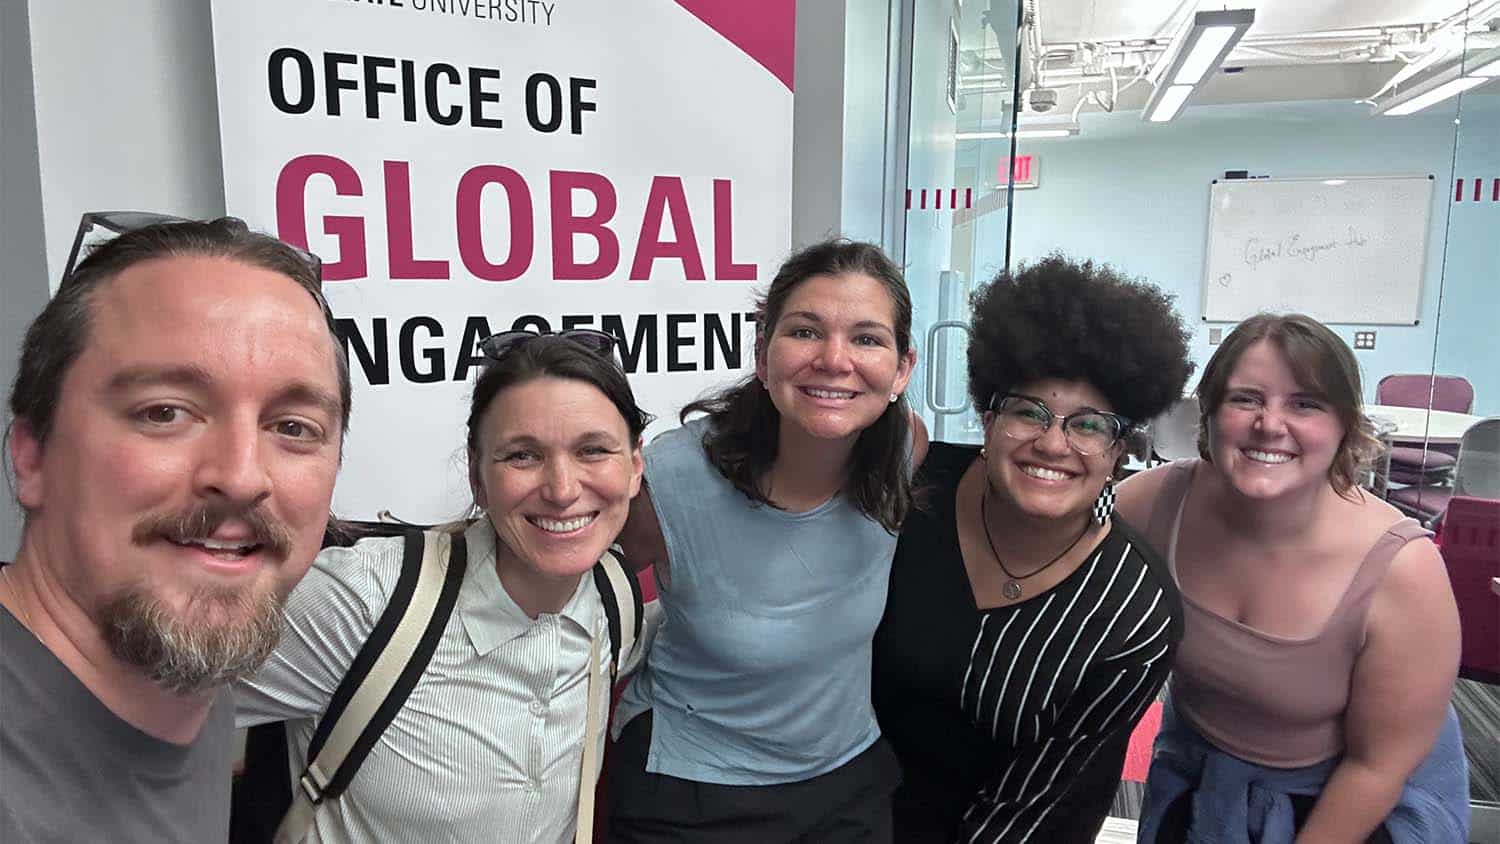 Anaël Symůnková with her colleagues from main campus at the Office of Global Engagement